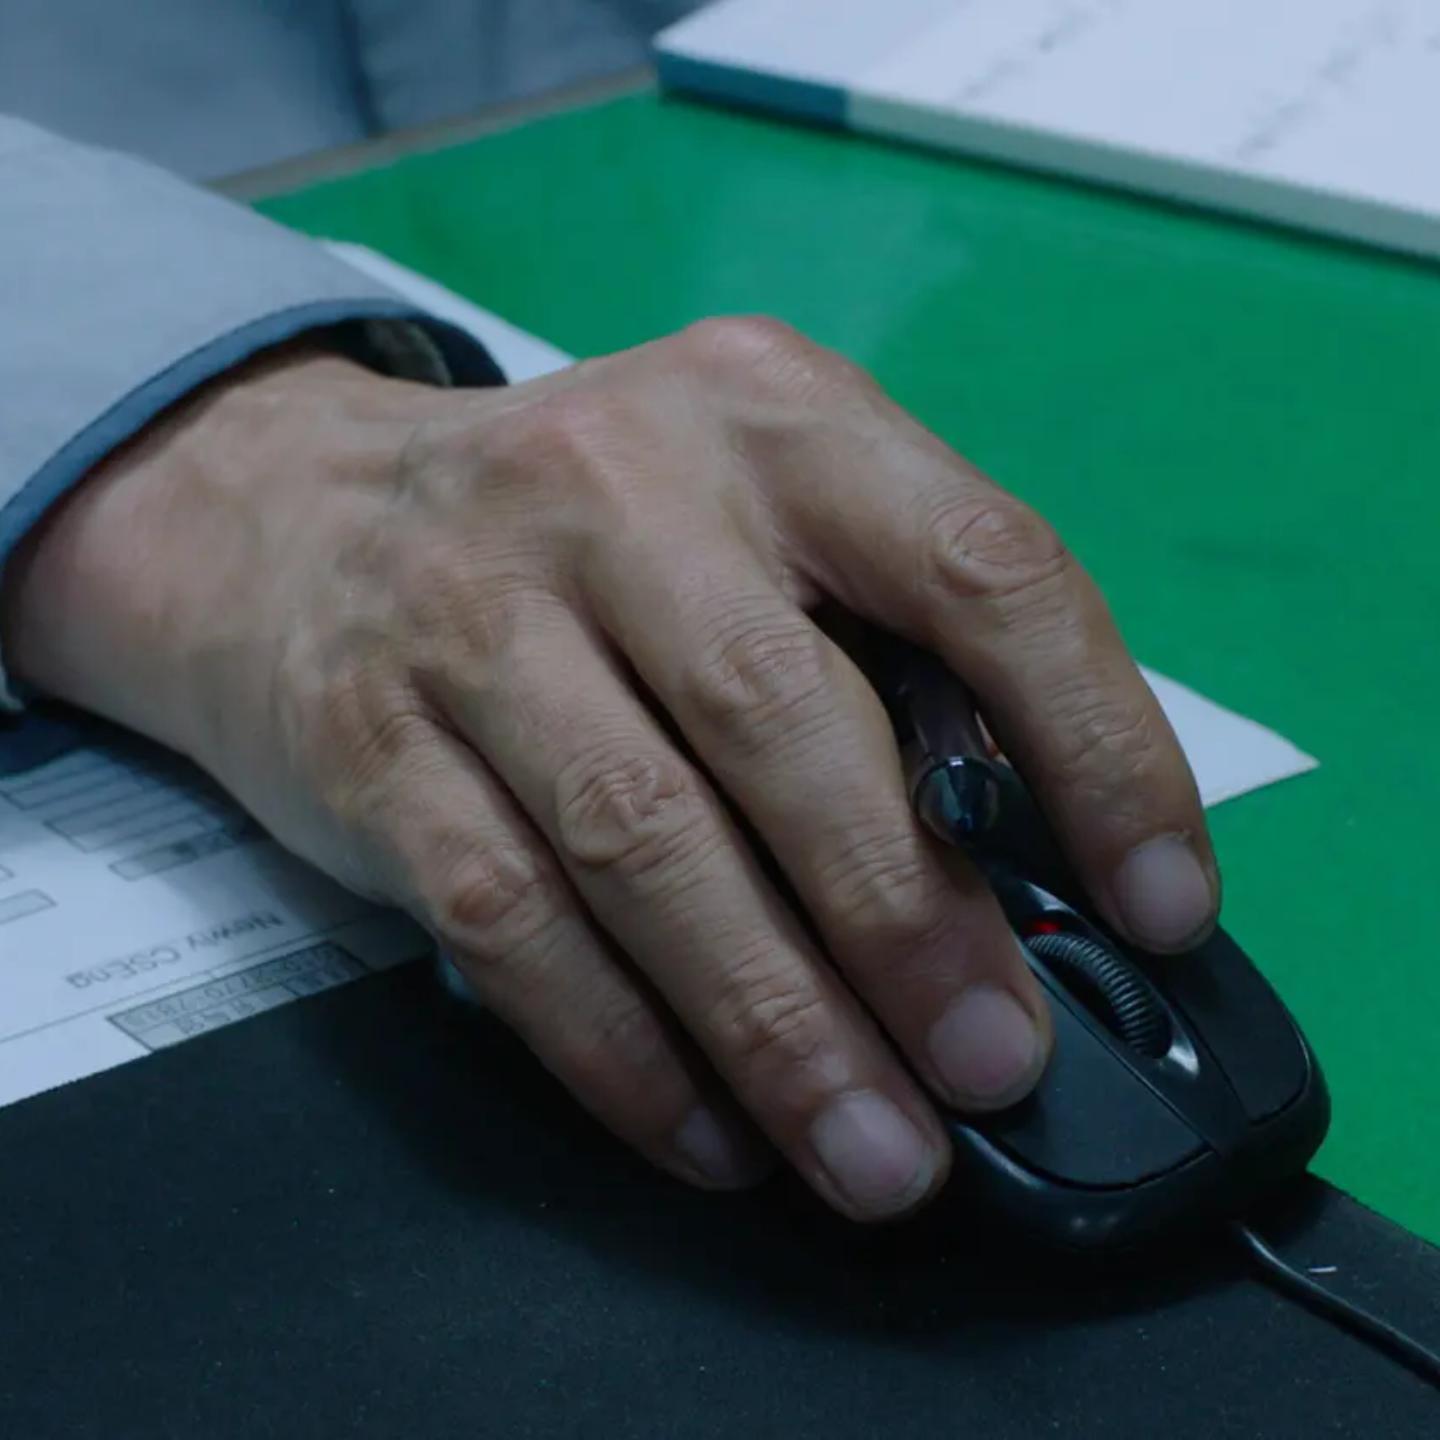 a person's hand on a mouse